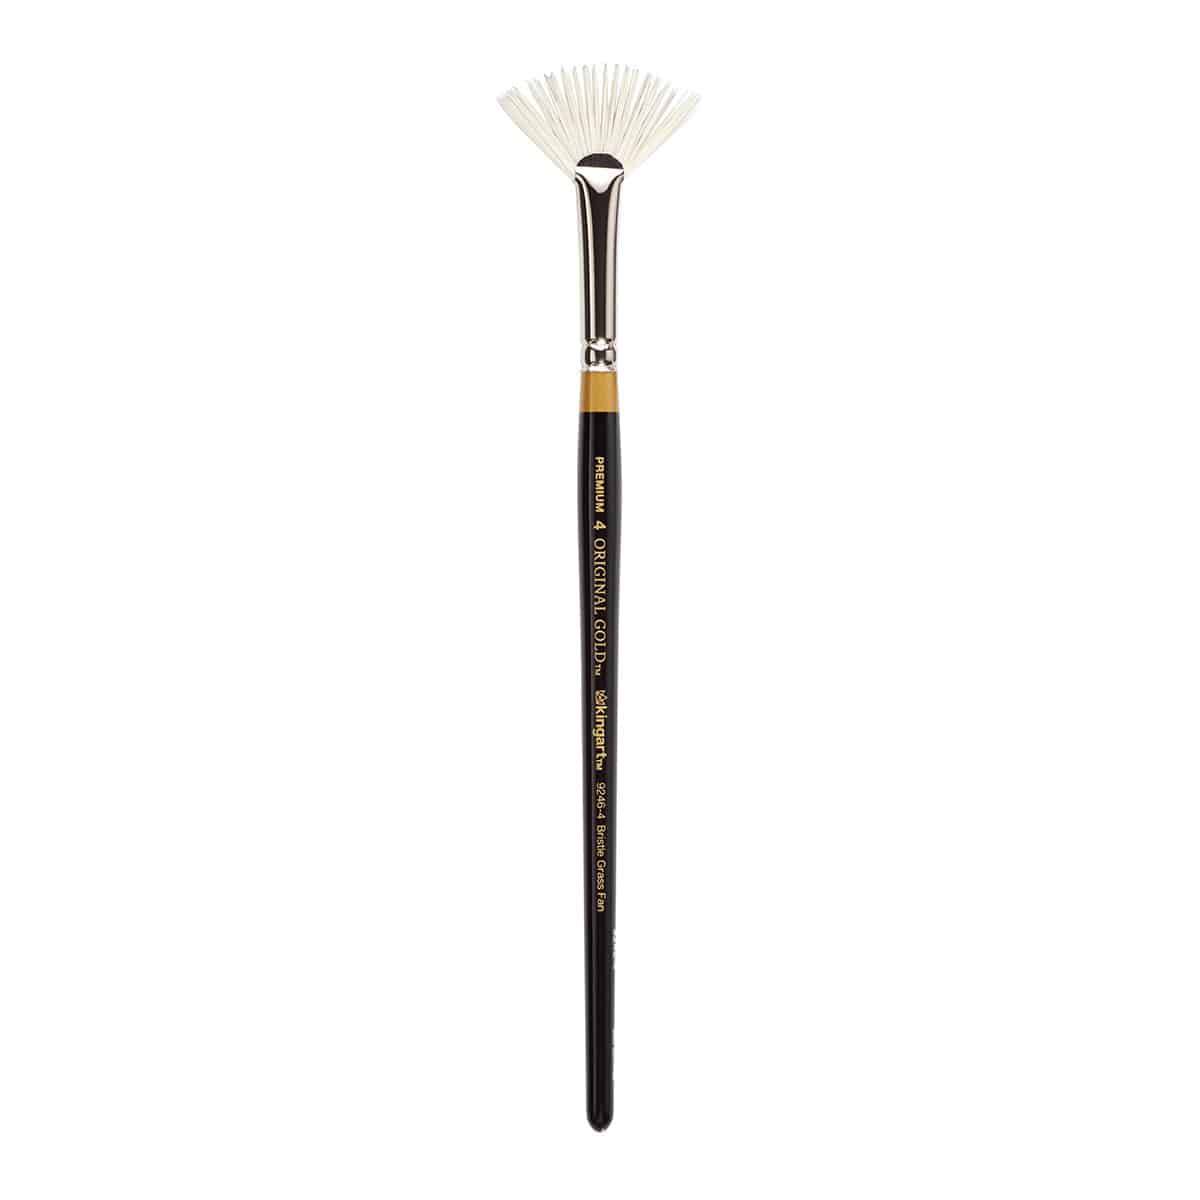 Proartek Drafting PK00021 Model 2341 Comfort Curve 13.5 Drafting Brush; Made of Hardwood with A Smooth Finish and Curving for Long-Lasting and Easy